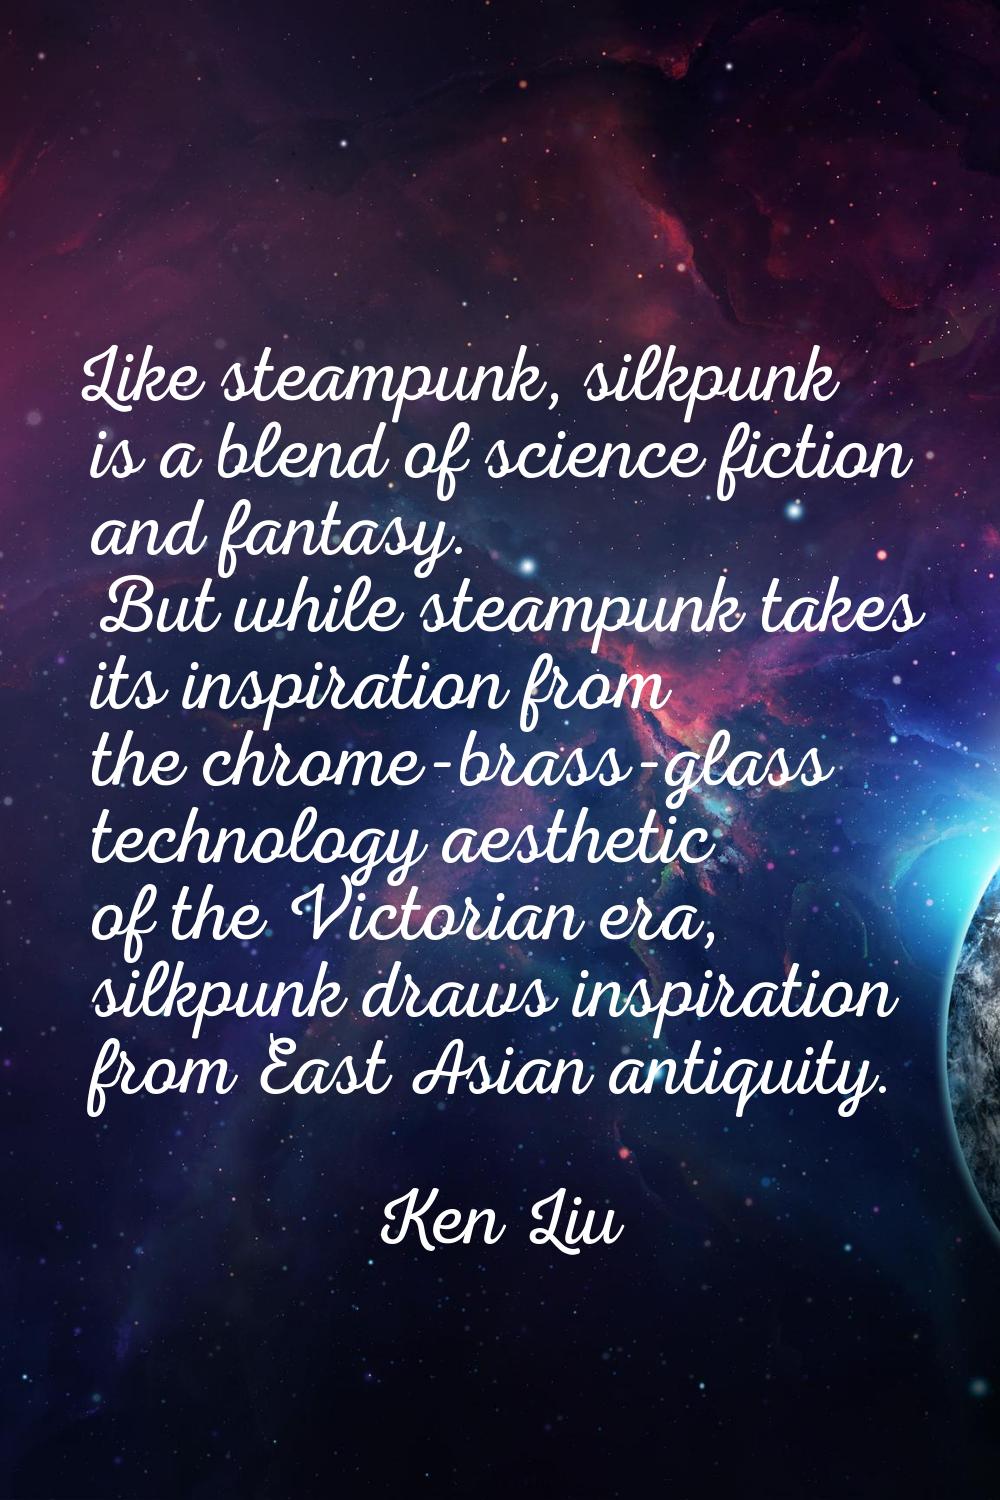 Like steampunk, silkpunk is a blend of science fiction and fantasy. But while steampunk takes its i